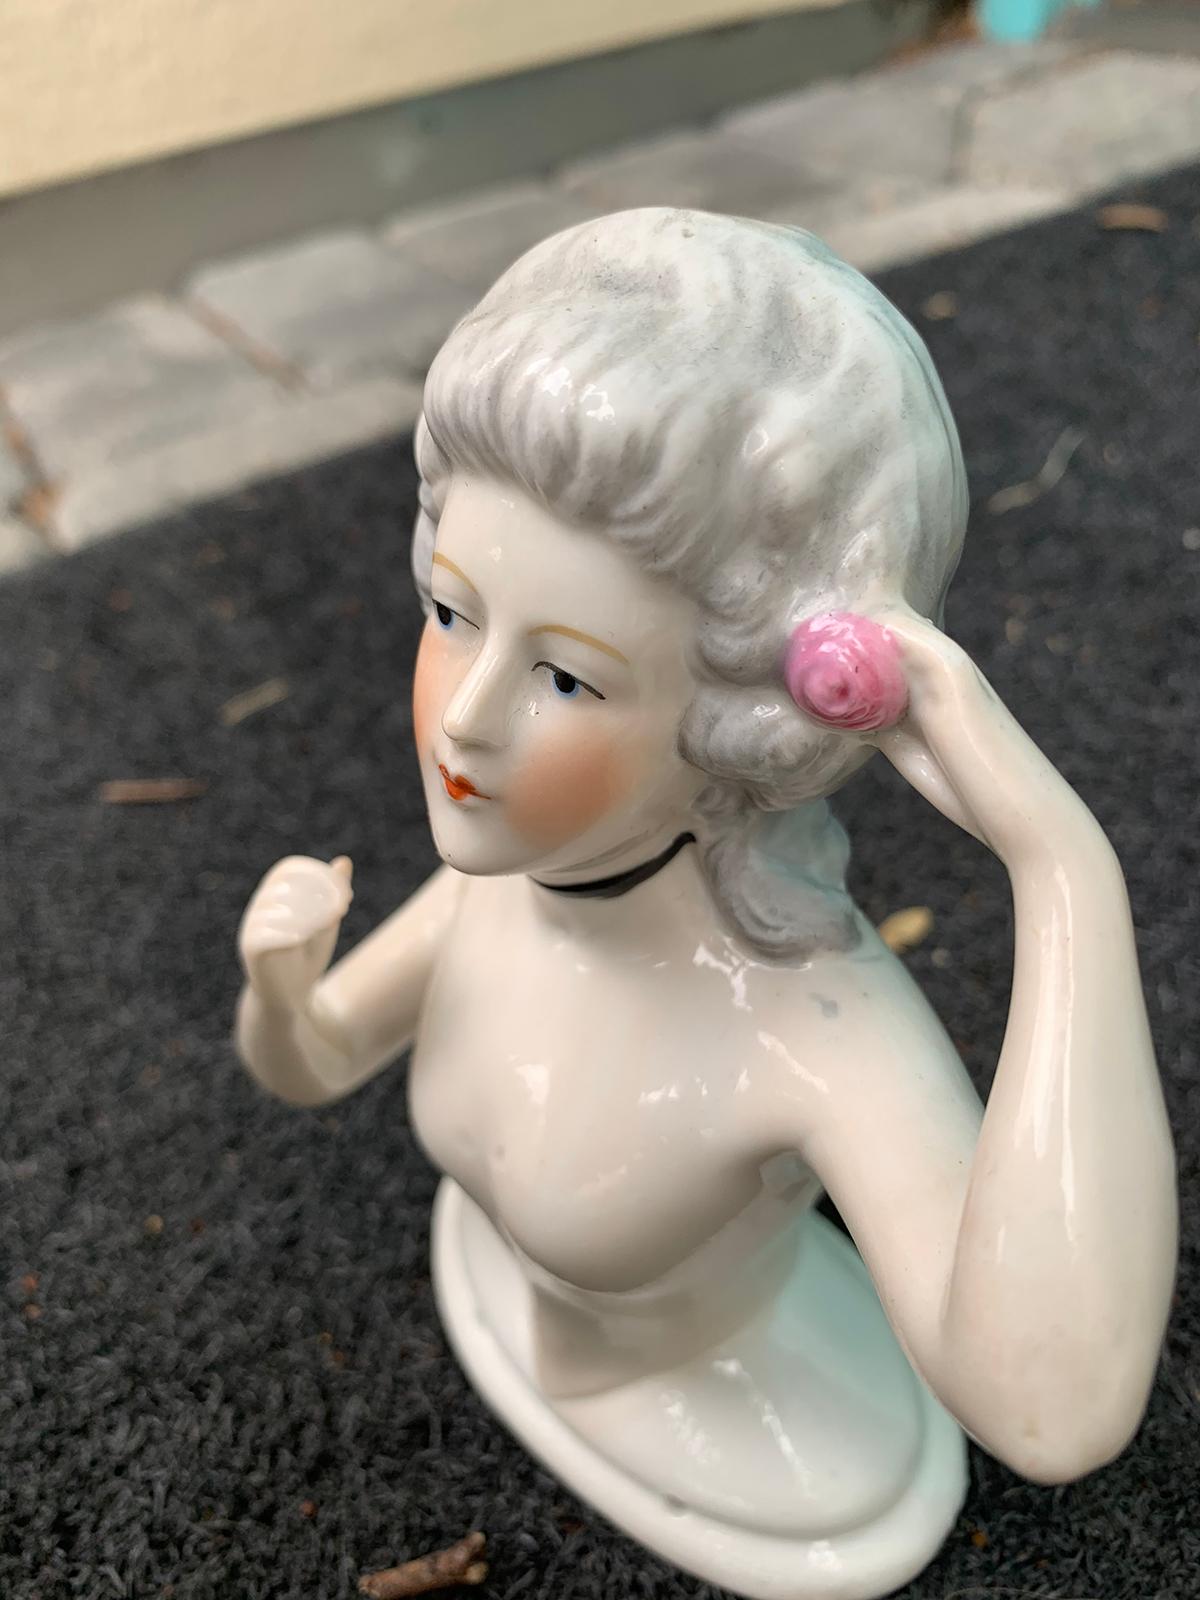 Early 20th Century German Porcelain Marie Antoinette Style Half-Doll Figure For Sale 3